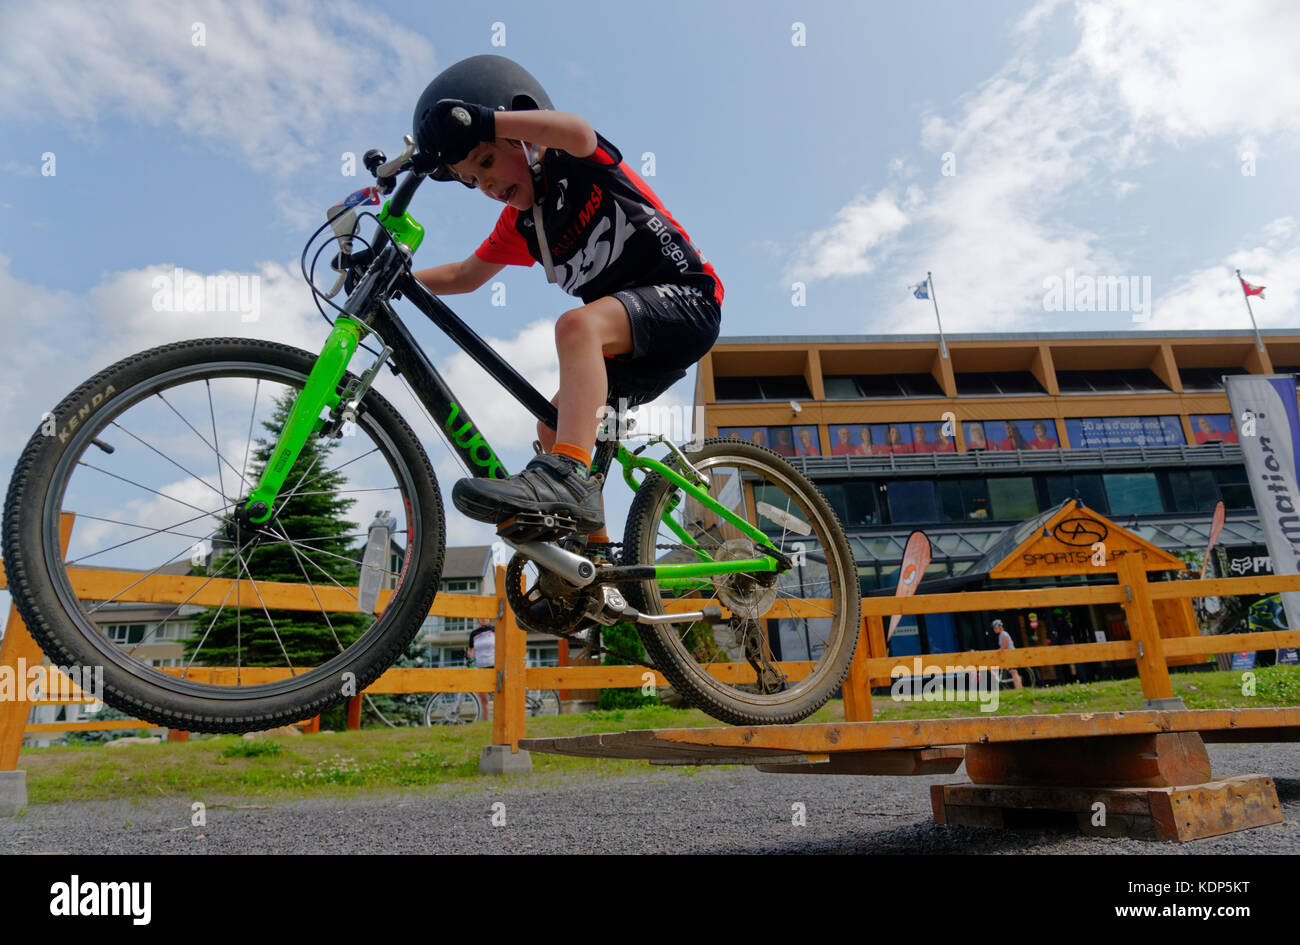 A young boy (5 yrs old) jumping in a mountain bike Stock Photo